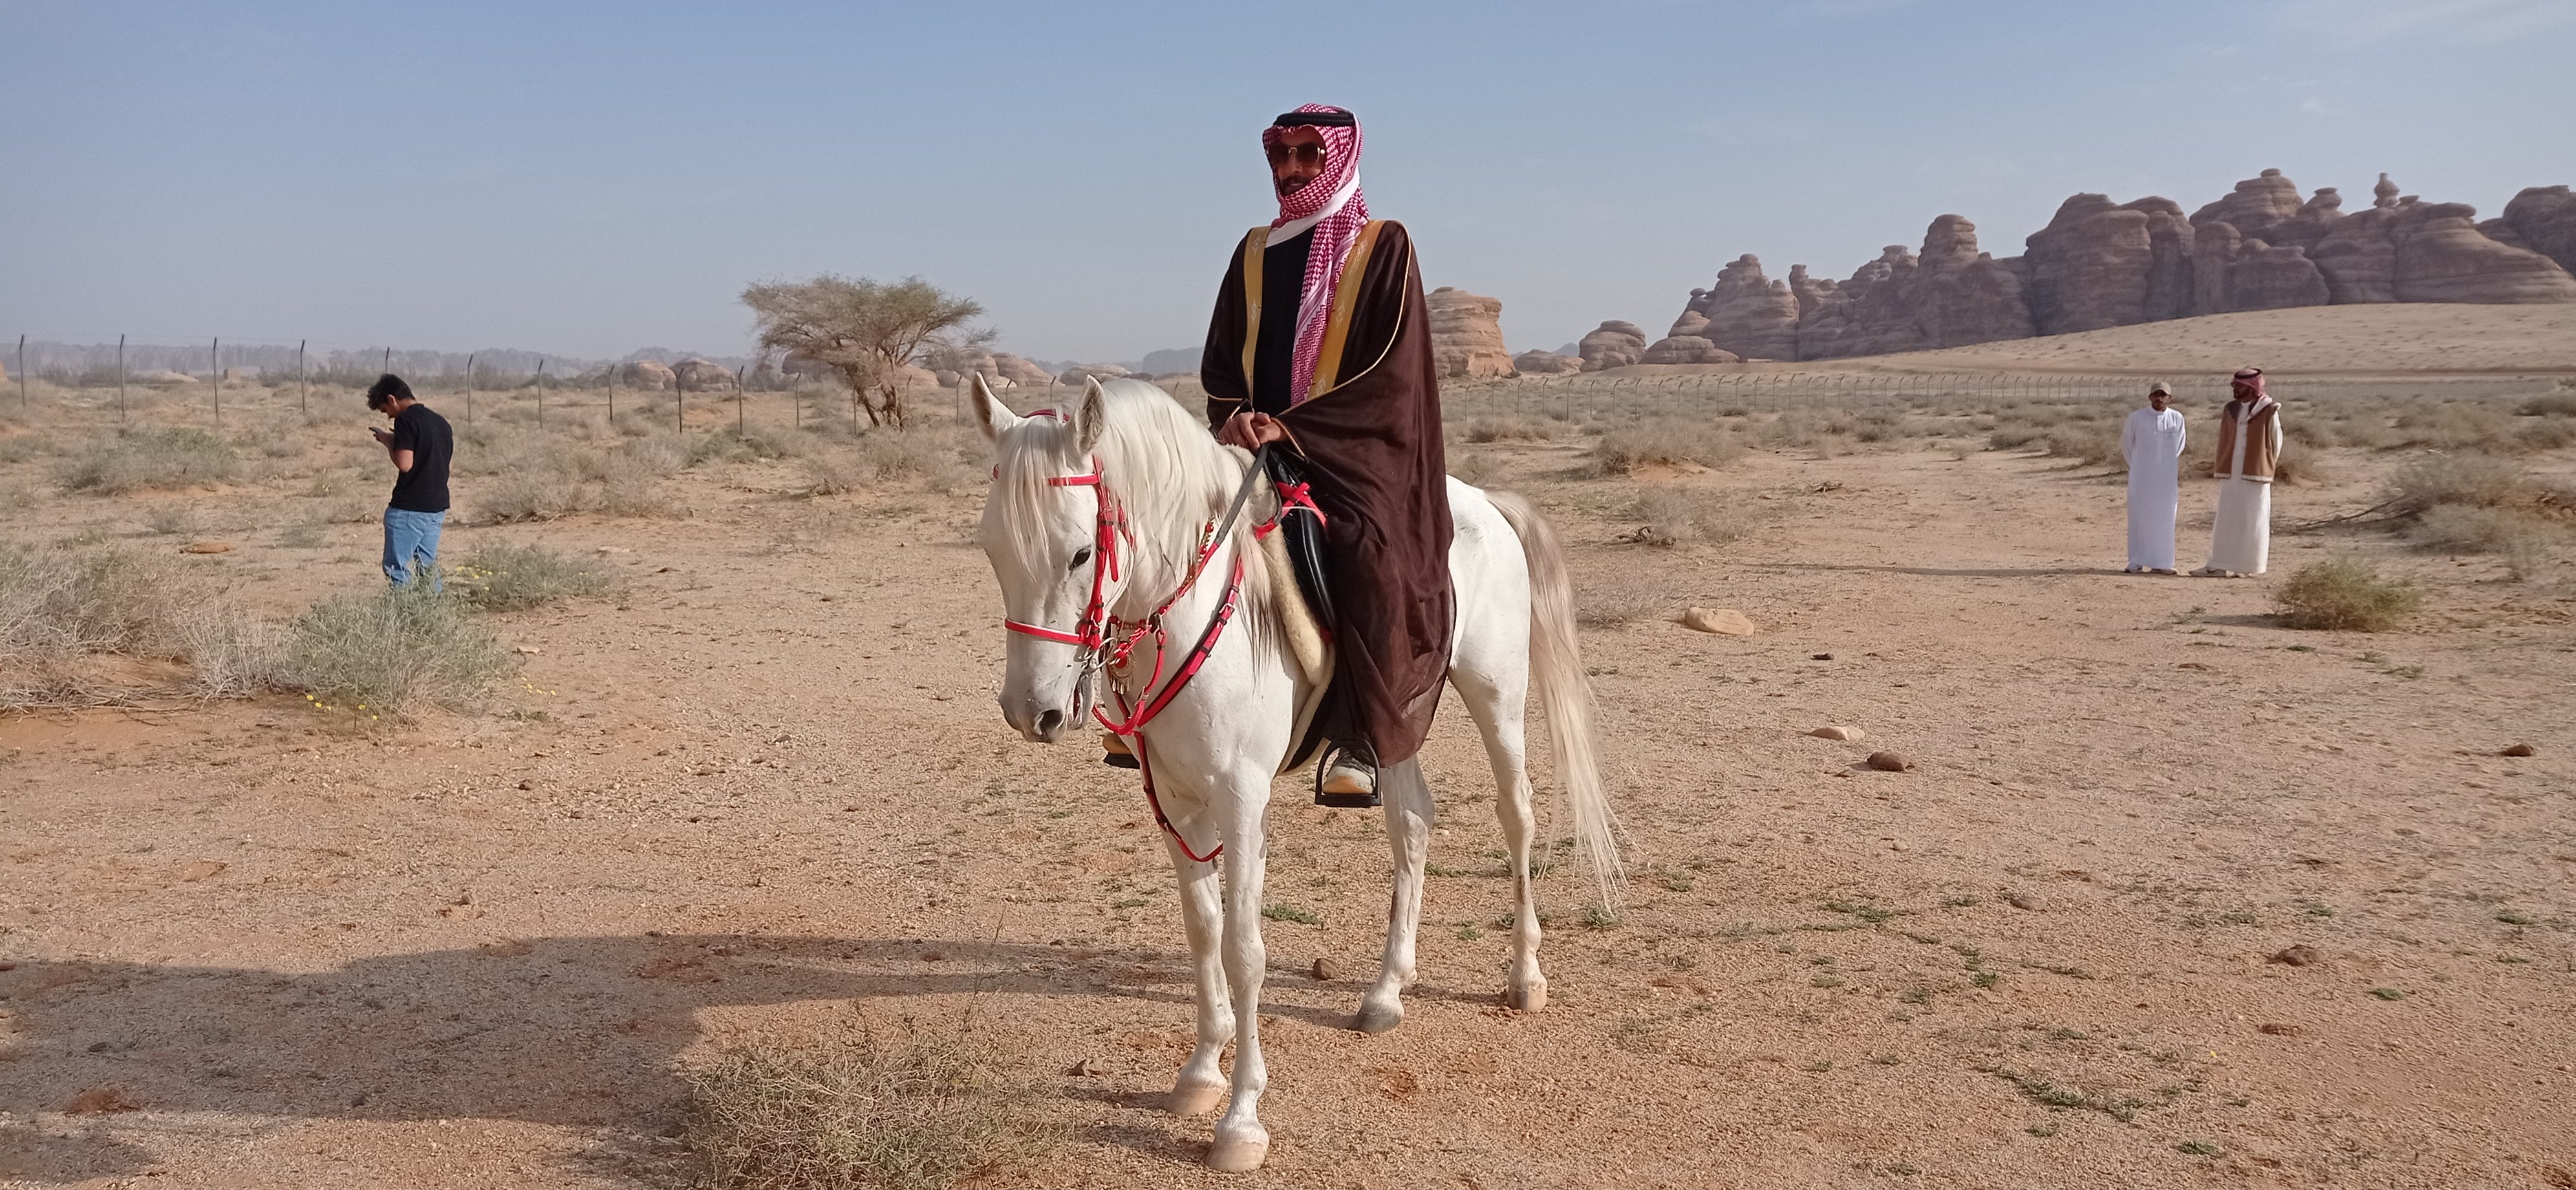 Sound Recordist: Capturing Galloping Arabian Horses in Challenging Environments